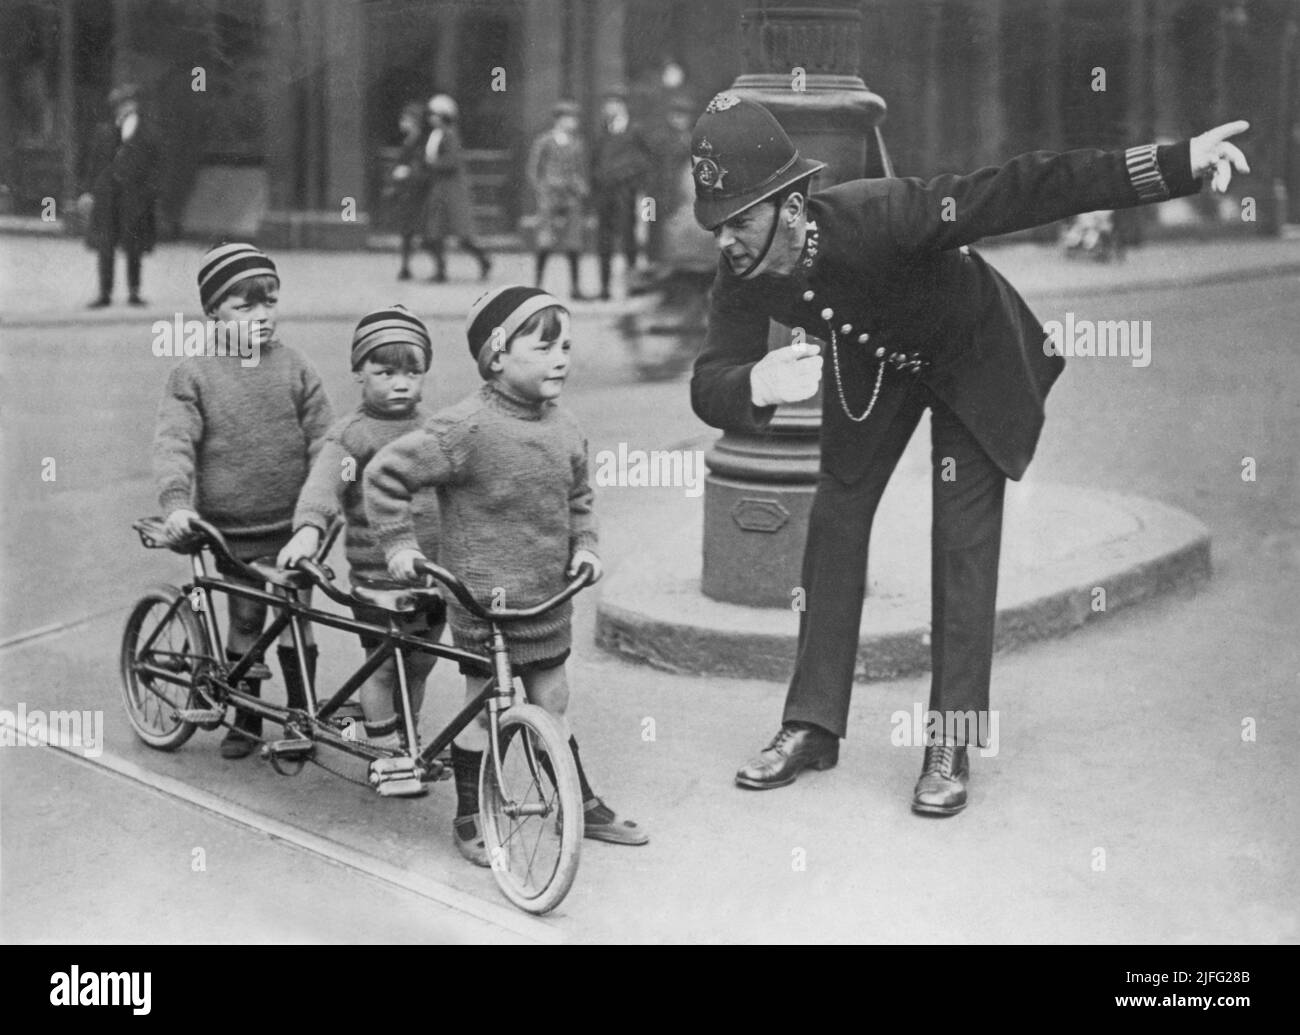 London in the 1920s. A policeman in a London street giving directions to the three children on a bicycle. The bicycle is specially made for three persons. The boys are dressed alike in woolen sweaters and caps. Stock Photo